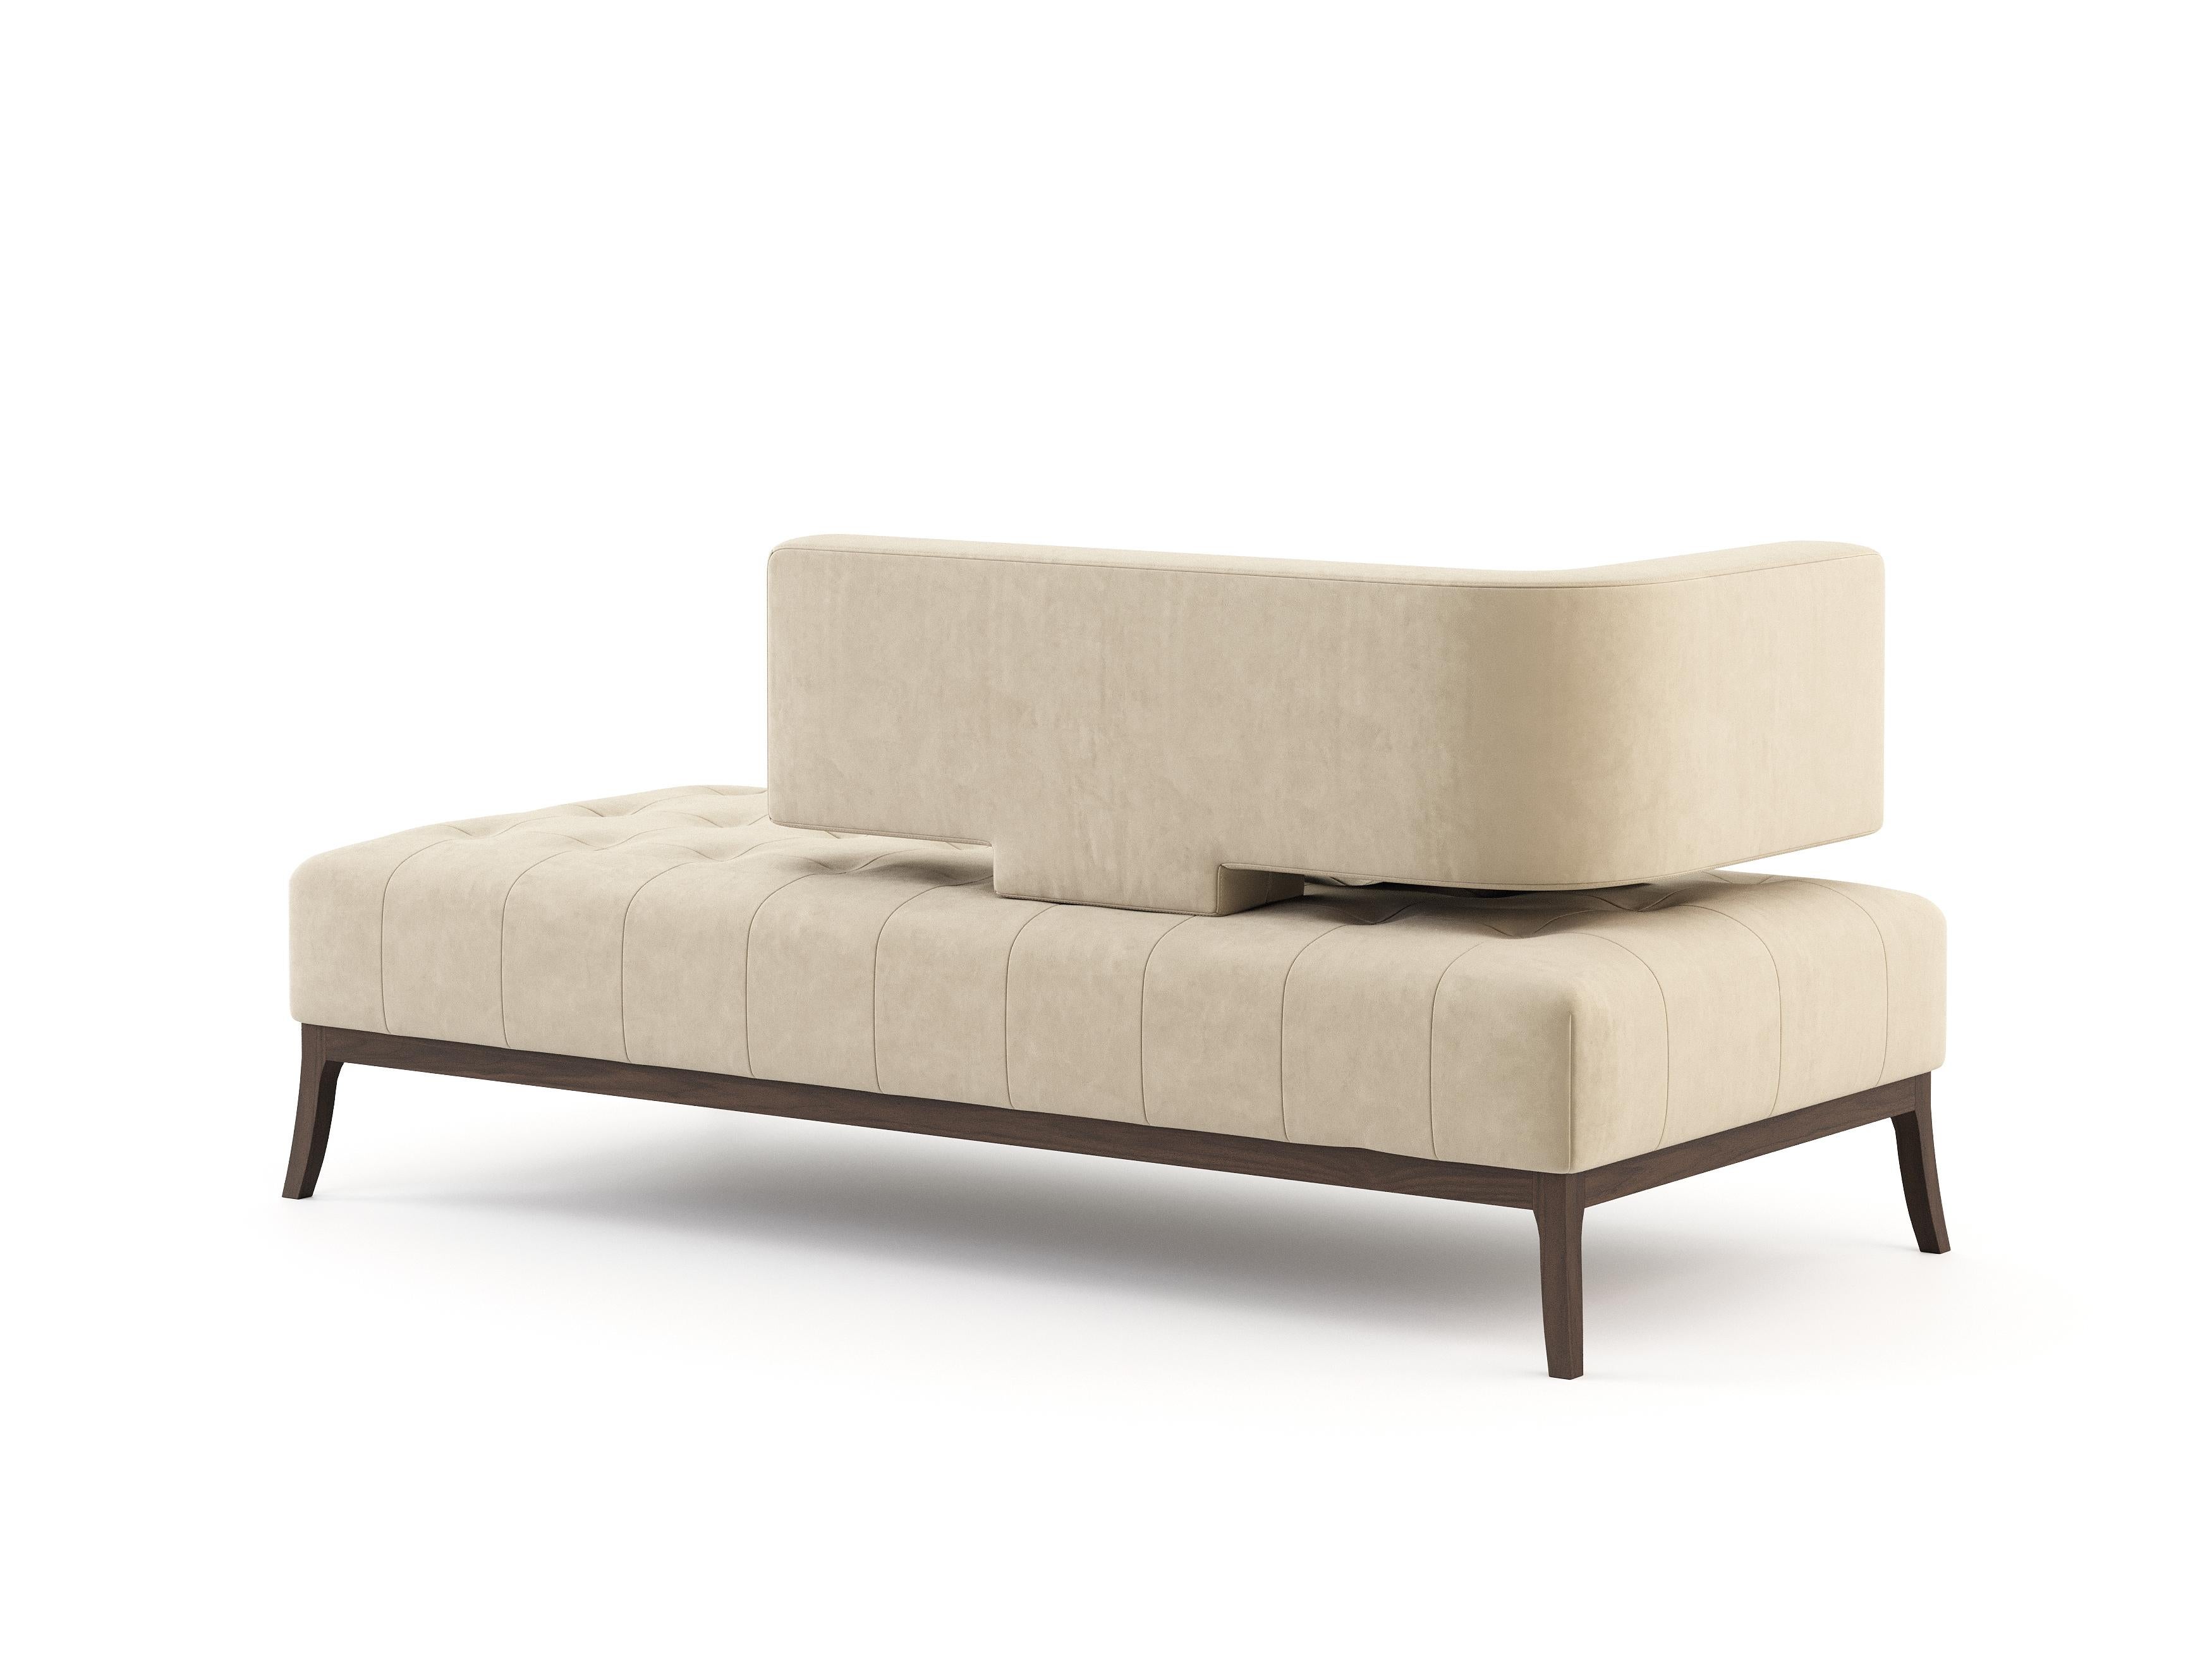 Hand-Crafted Mid-Century Modern Passione Chaise Lounge Made with Walnut and Suede For Sale